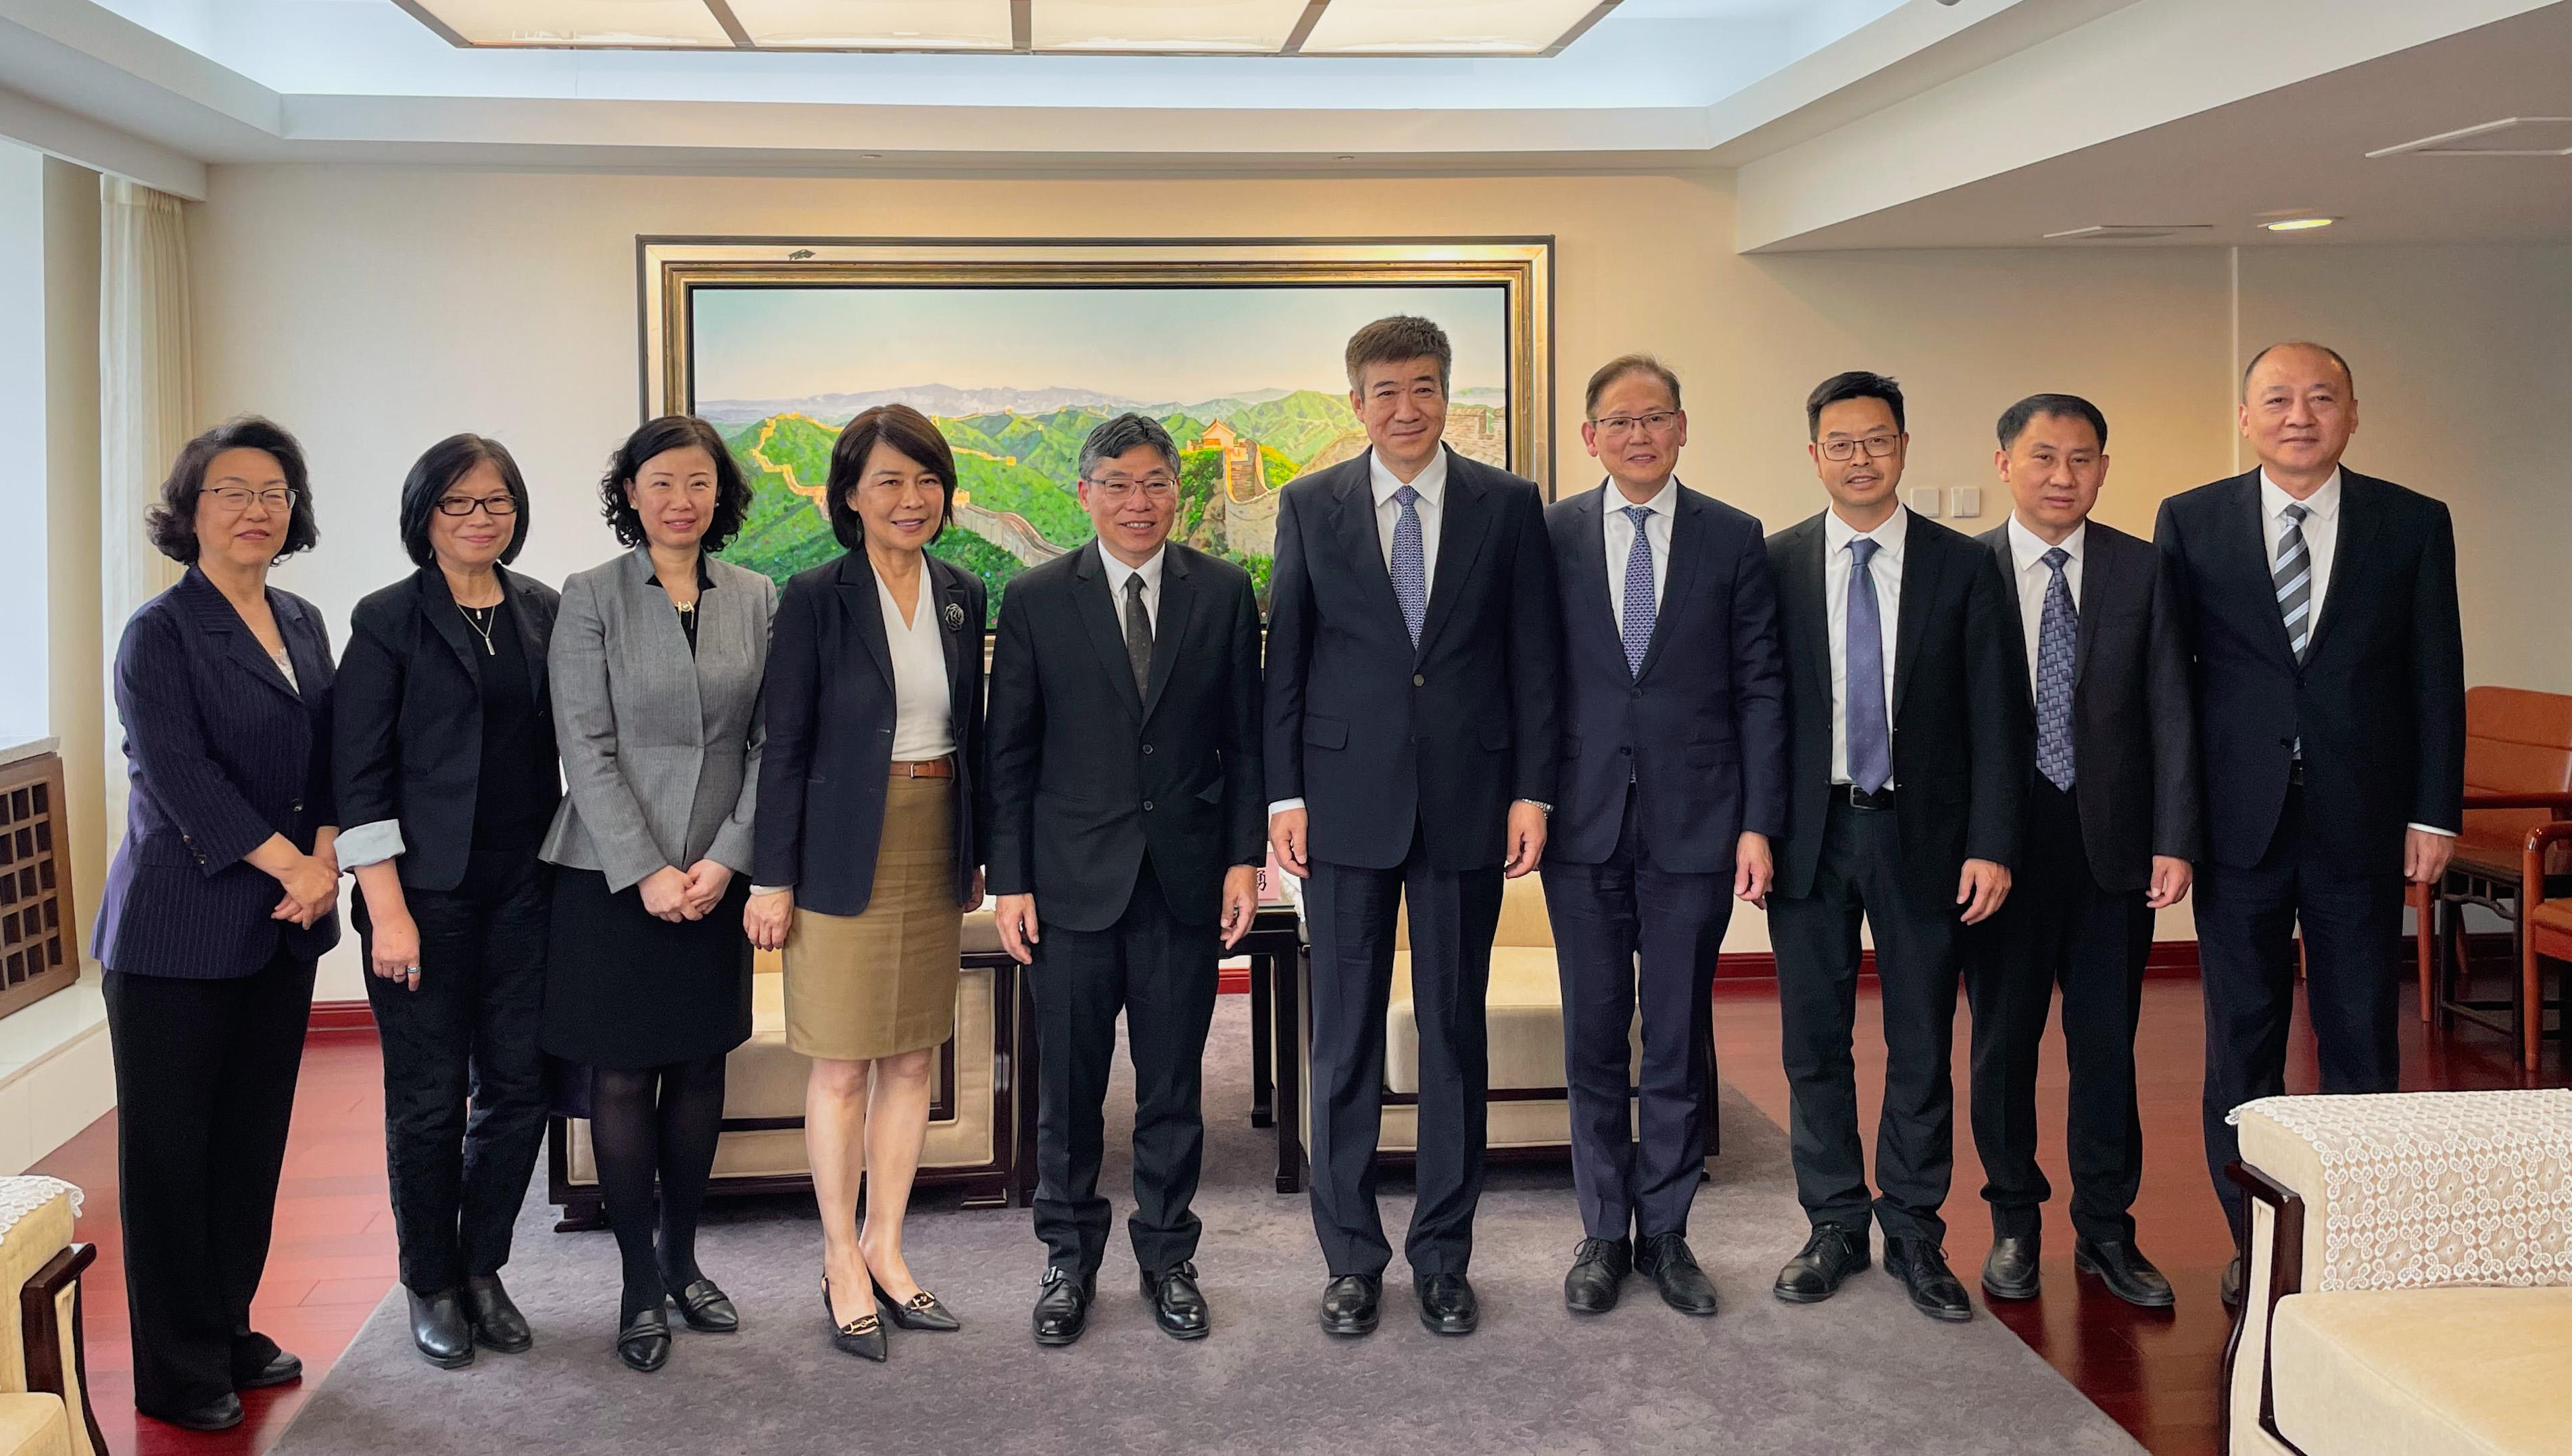 The Secretary for Transport and Logistics, Mr Lam Sai-hung (fifth left), today (April 19) called on the Administrator of the Civil Aviation Administration of China, Mr Song Zhiyong (fifth right), in Beijing. The Chief Operating Officer of the Airport Authority Hong Kong, Mrs Vivian Cheung (fourth left), and the President of the Hong Kong International Aviation Academy, Mr Simon Li (fourth right), also attended the meeting.
